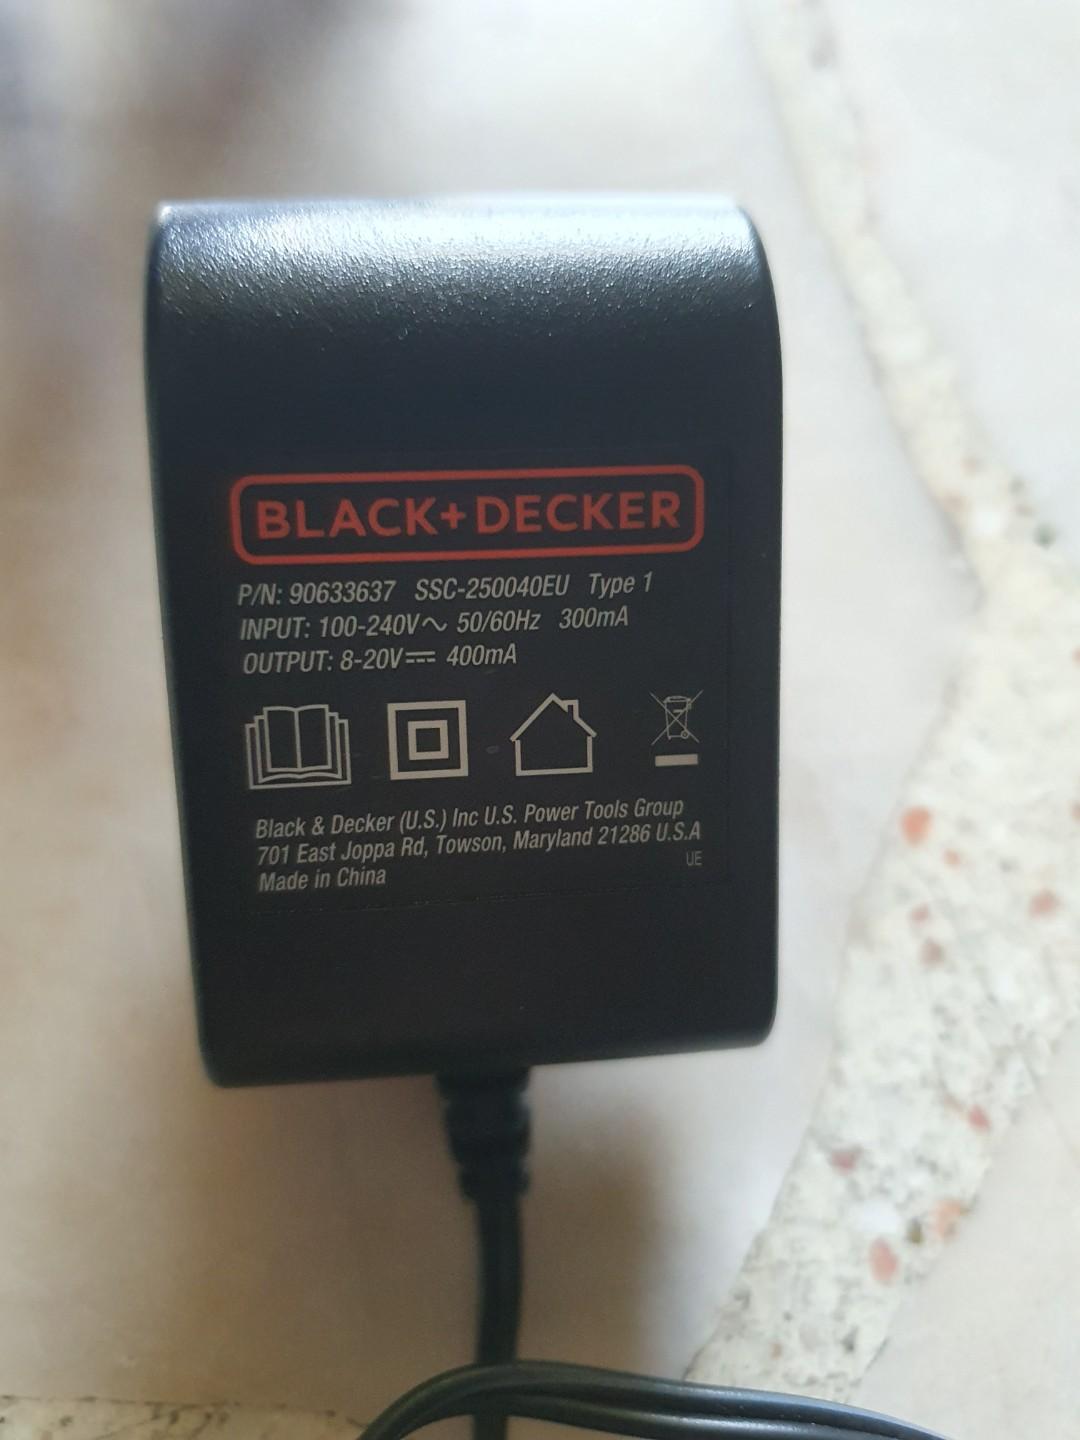 https://media.karousell.com/media/photos/products/2020/04/10/drill_battery_and_charger_only__black__decker_1586507170_5bedeb99_progressive.jpg